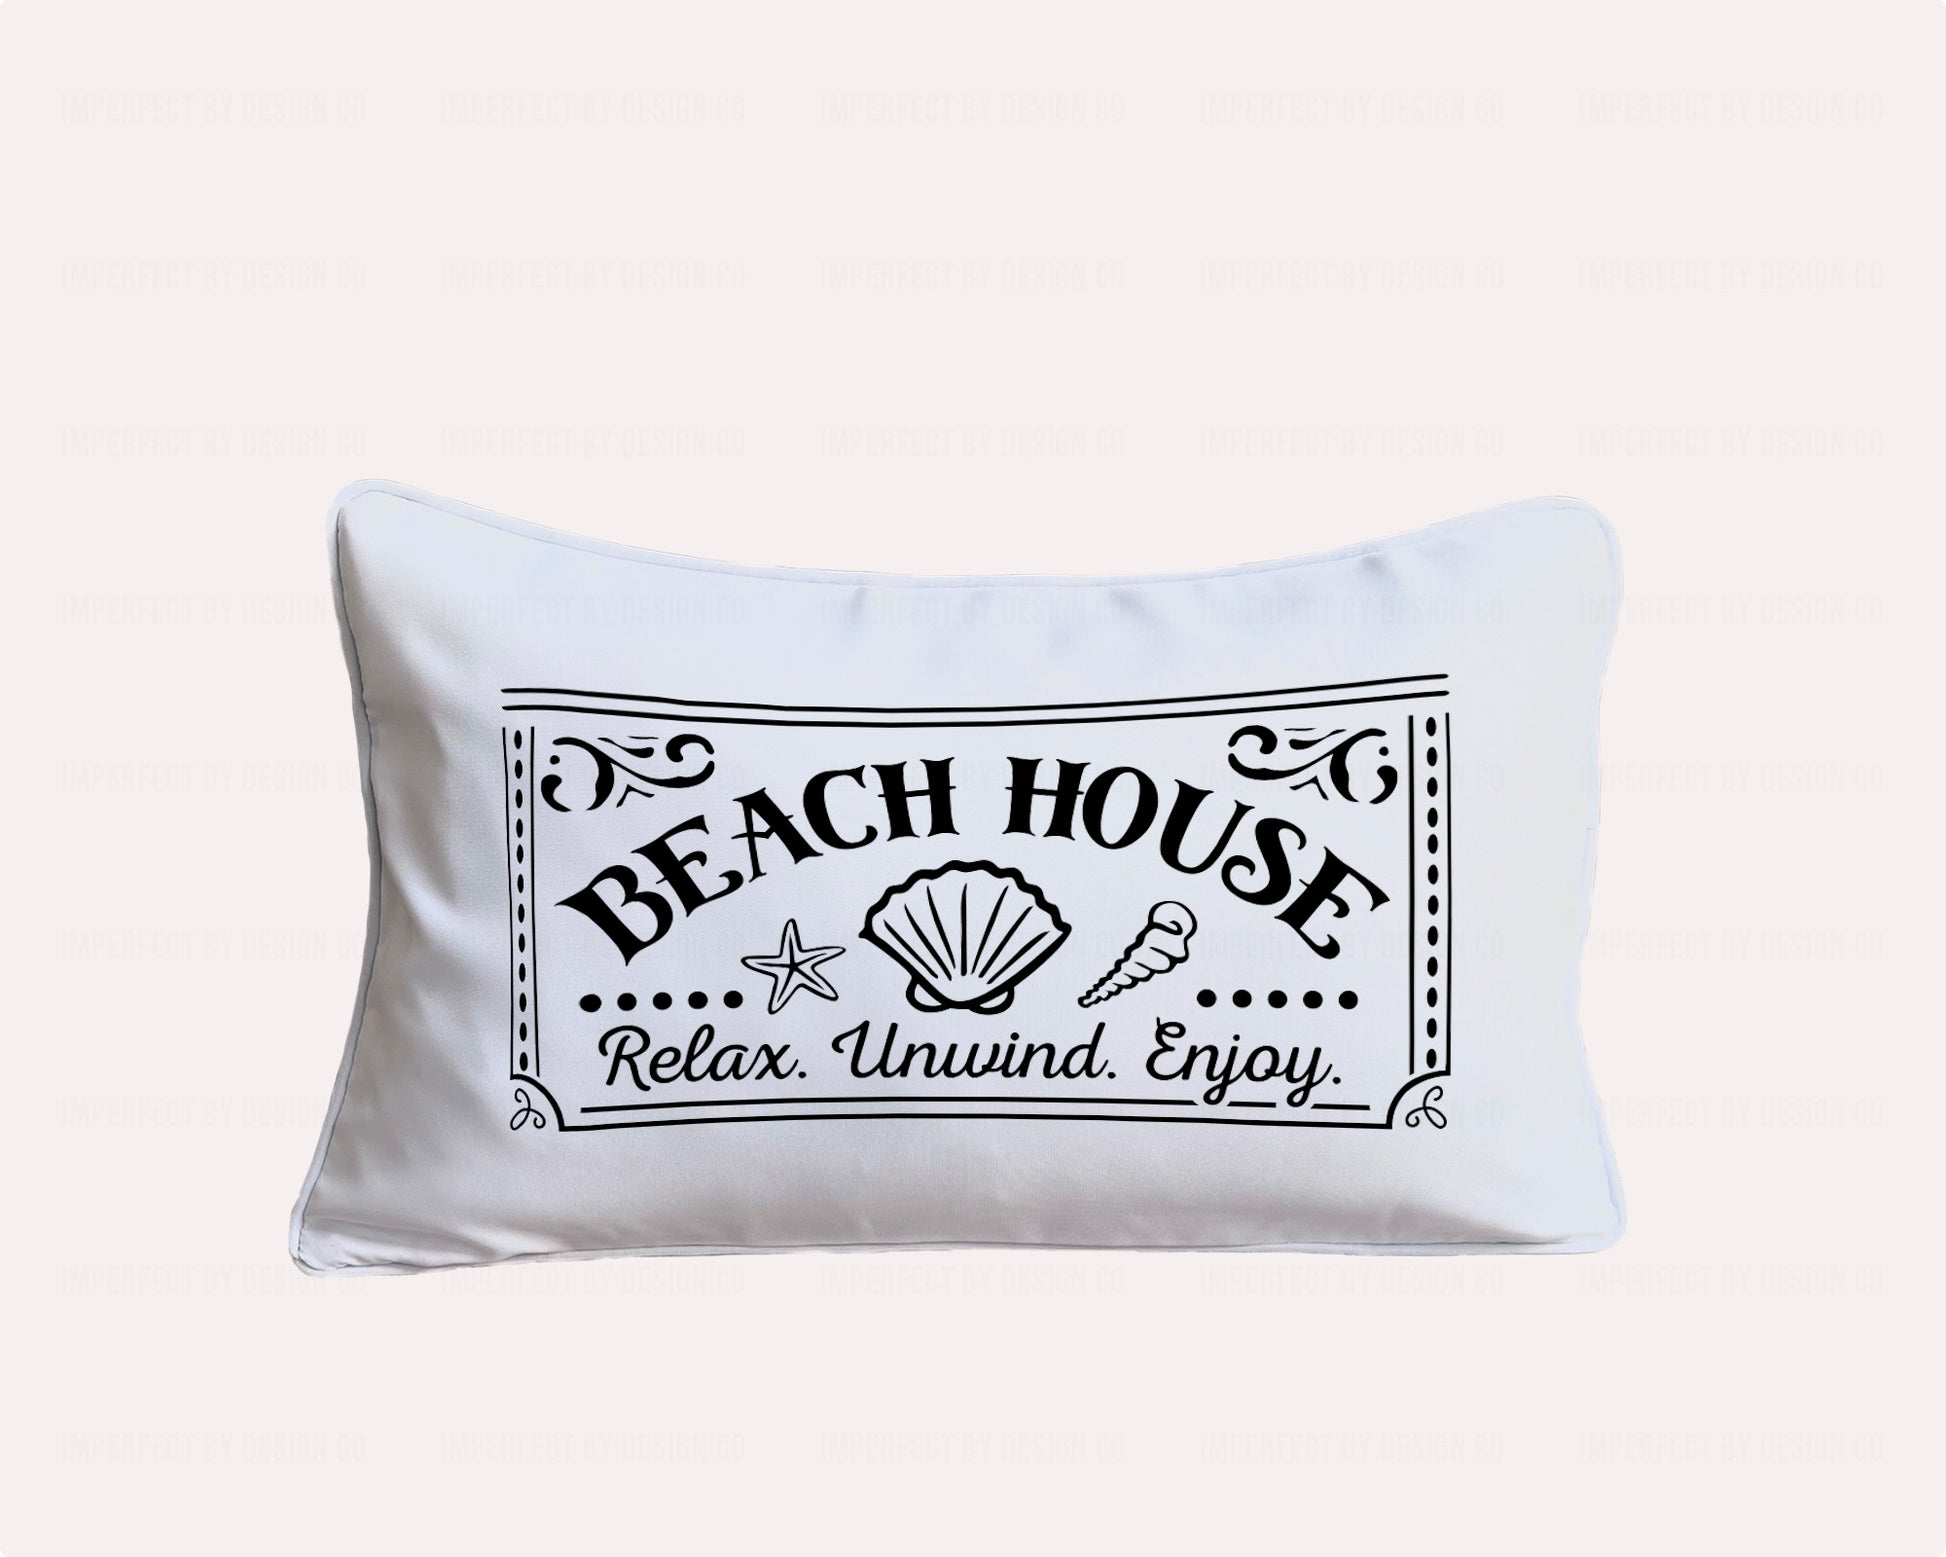 Front view of 12x20 pillow cover with seashell design and "BEACH HOUSE, Relax Unwind, Enjoy" text  | imperfect by design co